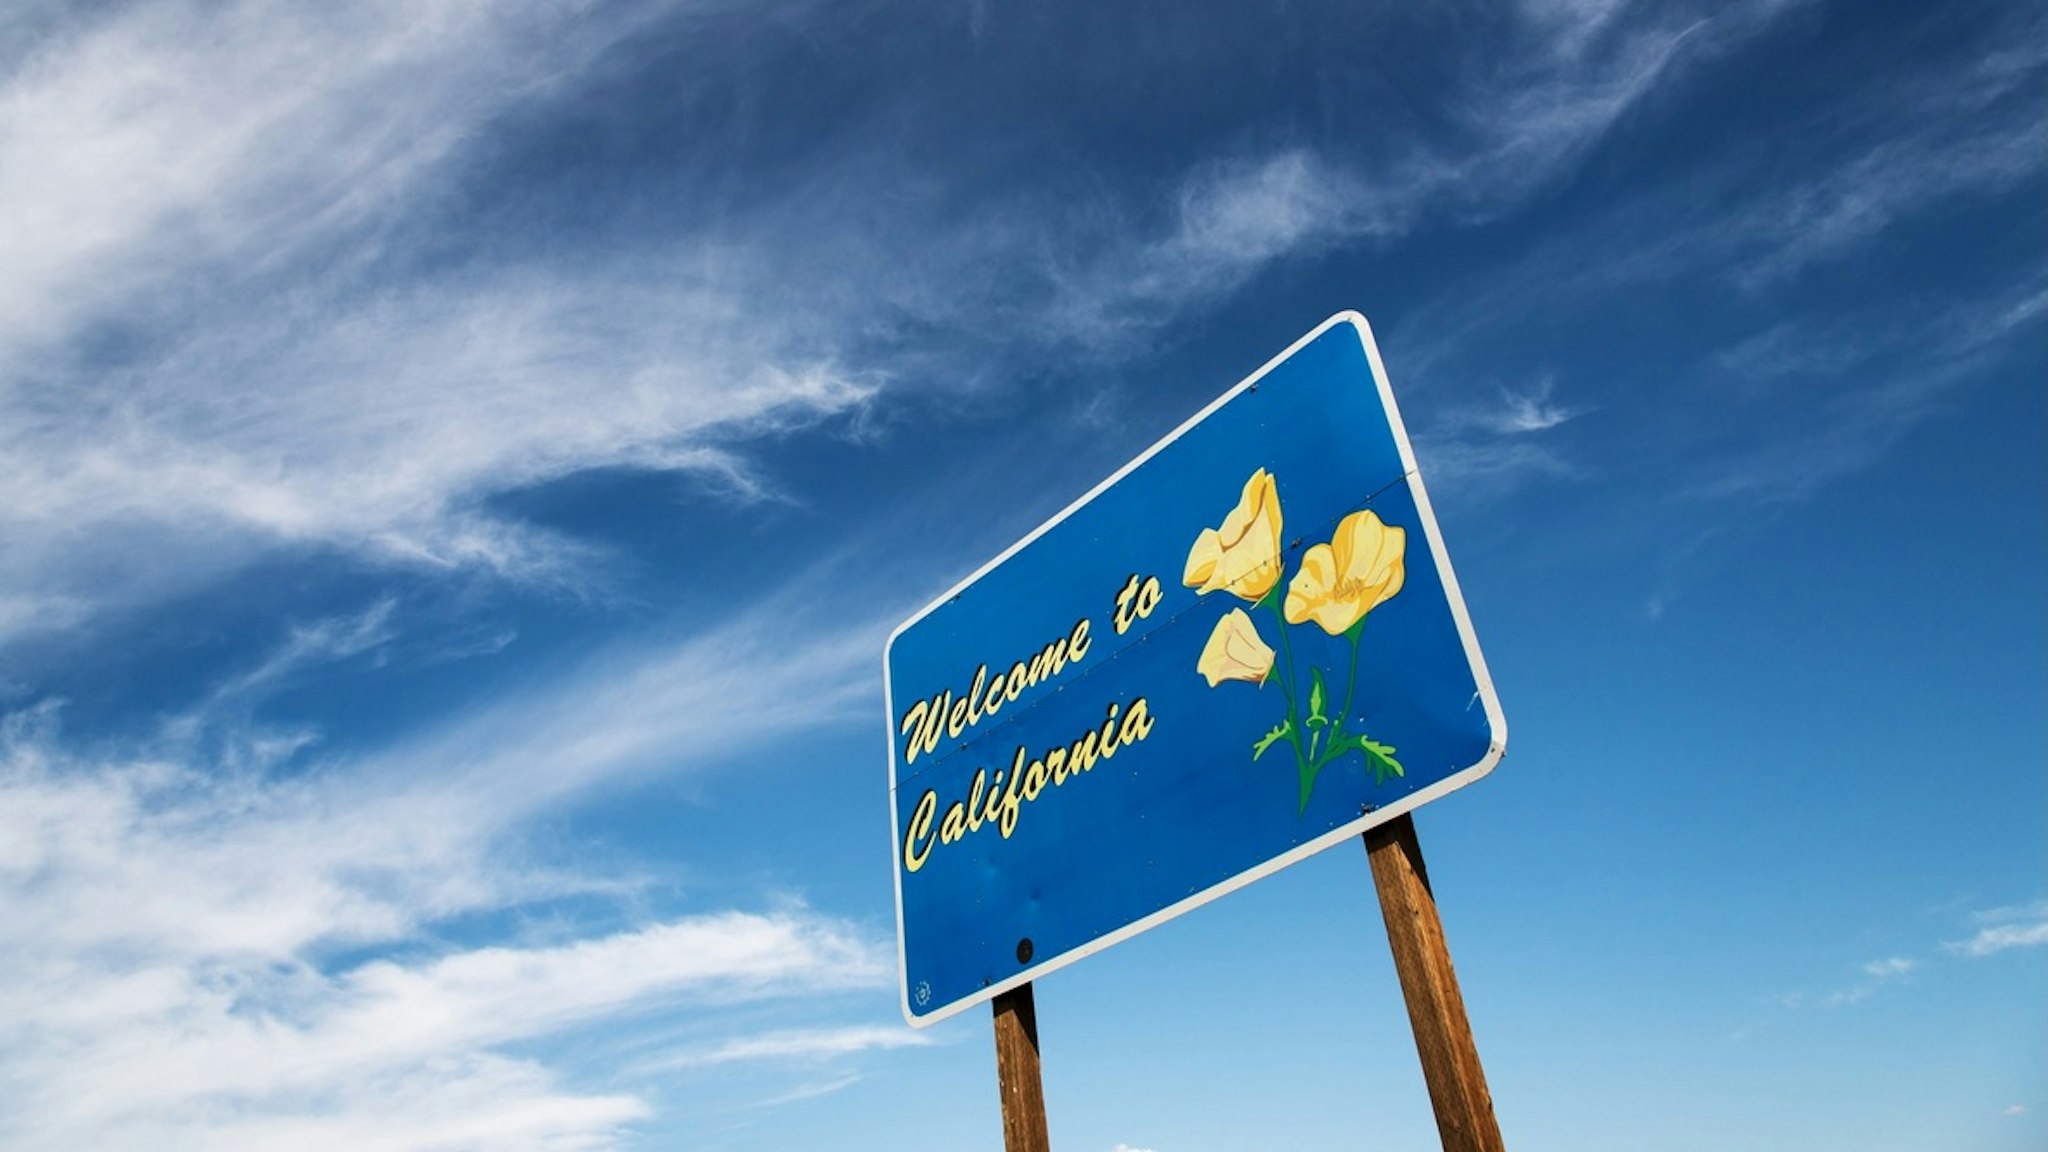 Welcome to California - stock photo Welcome sign to California at the Oregon border. Thomas Winz via Getty Images